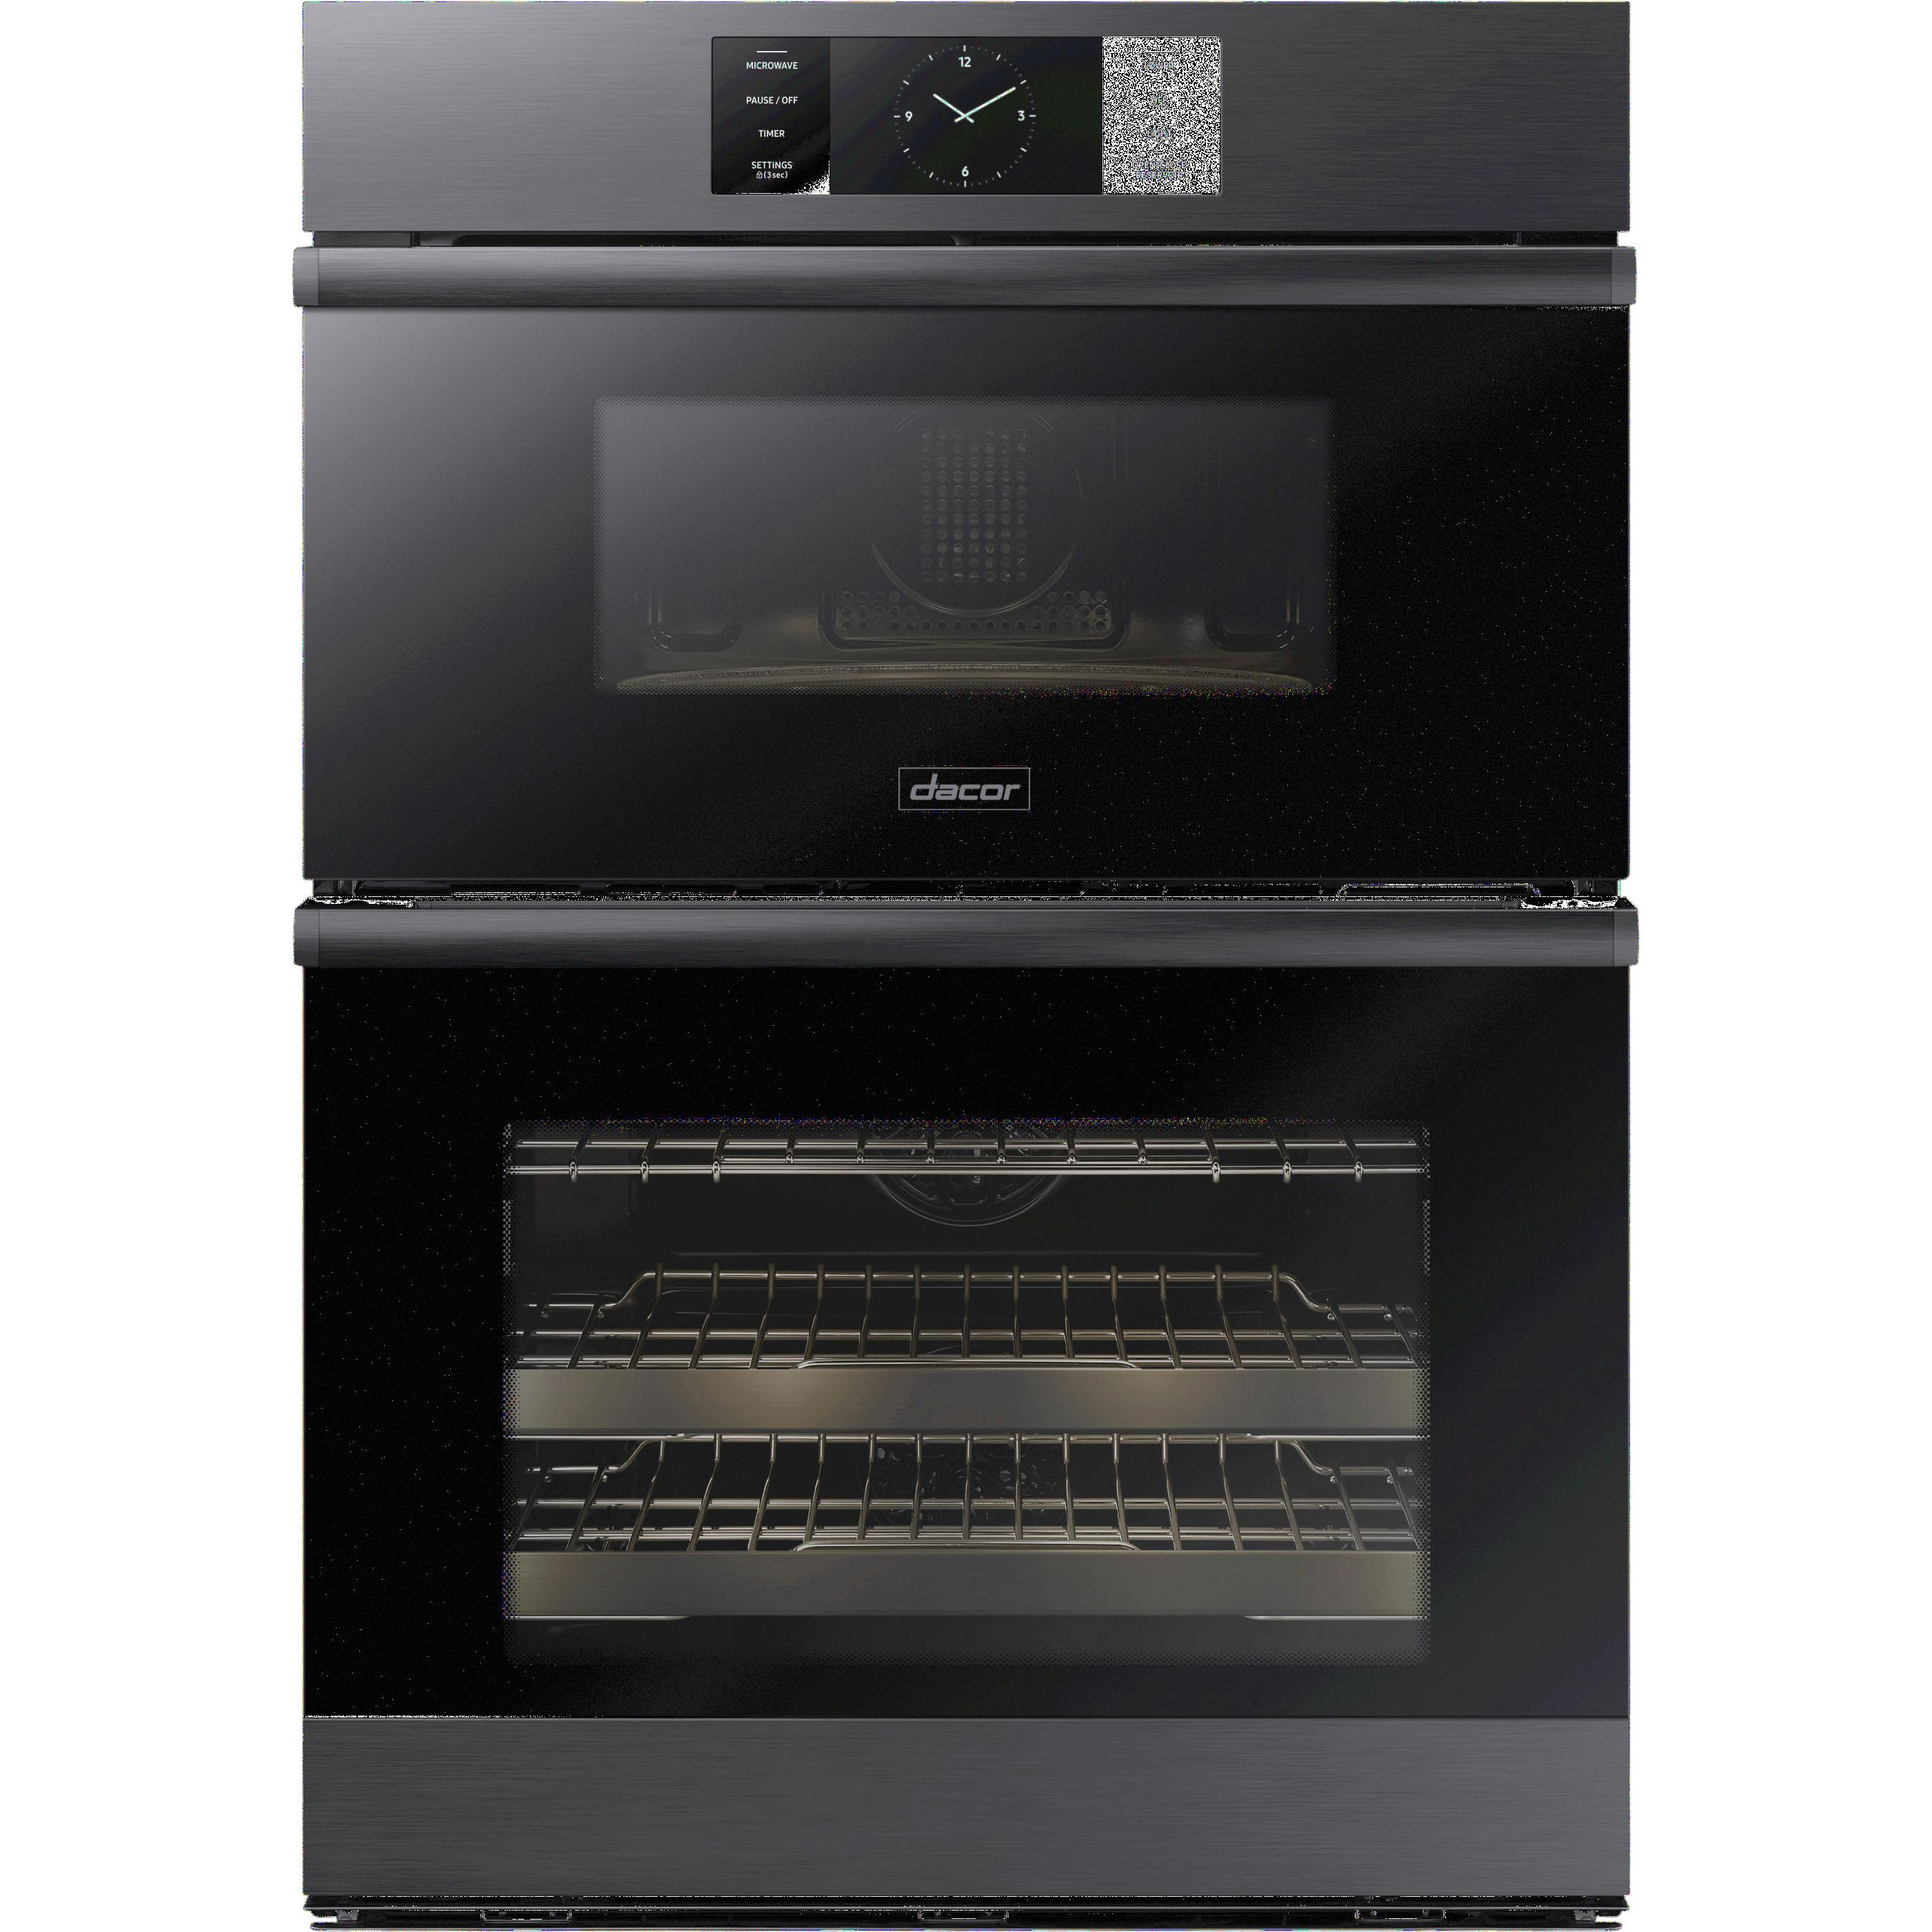 Dacor 30-inch Microwave and Oven Combination Wall Oven DOC30M977DM/DA